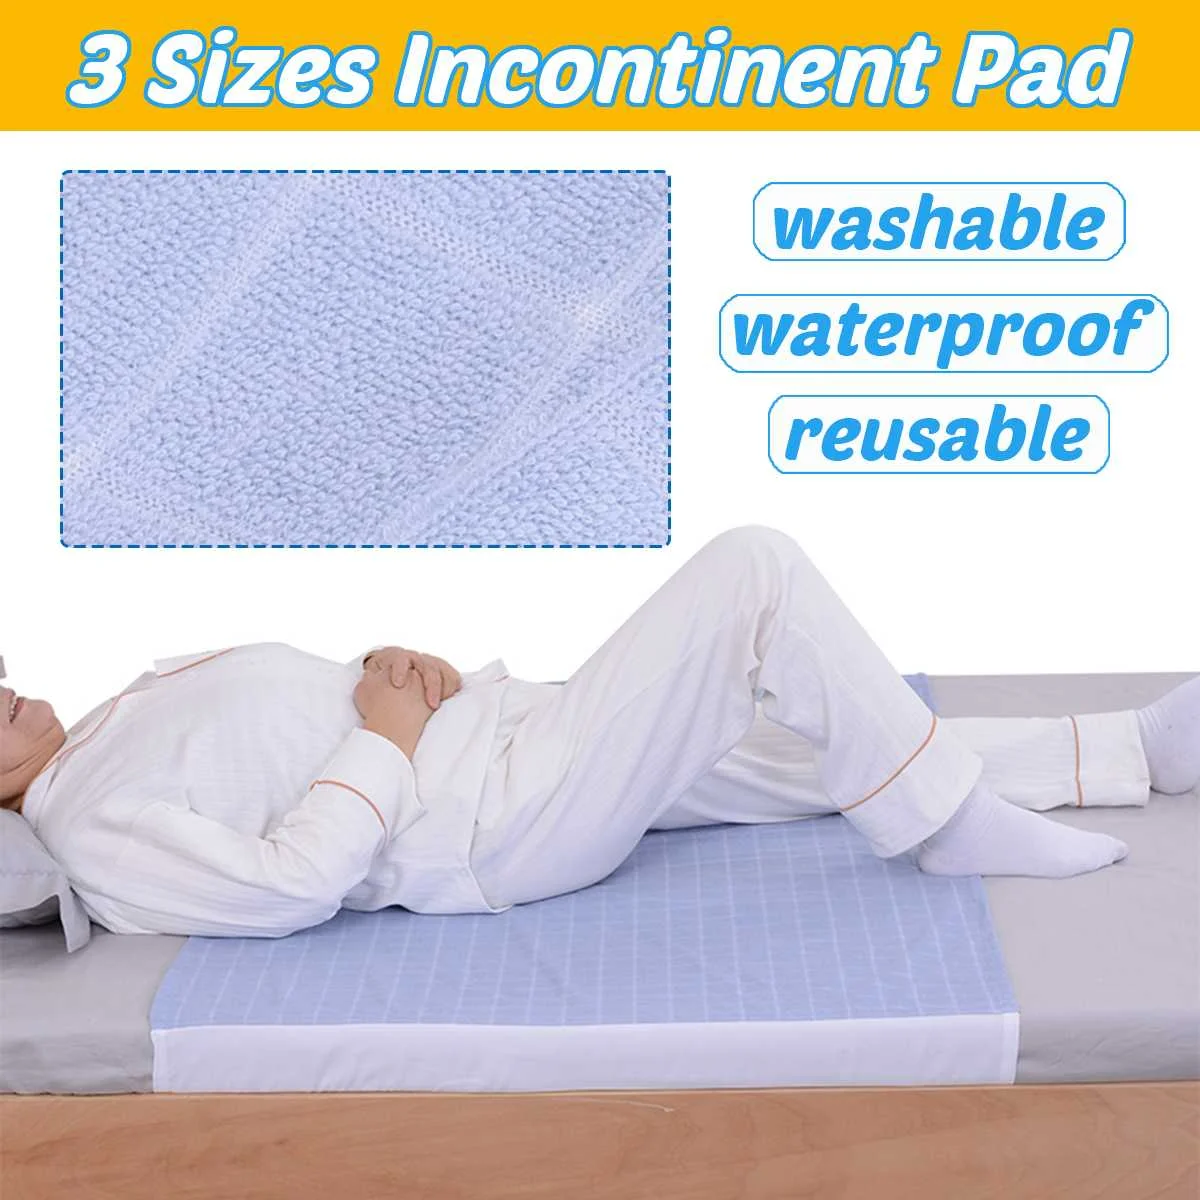 

Urine Mat Cotton Washable Reusable Mattress Diaper Changing Cover Pad Waterproof For Kids Adult Elderly Incontinence